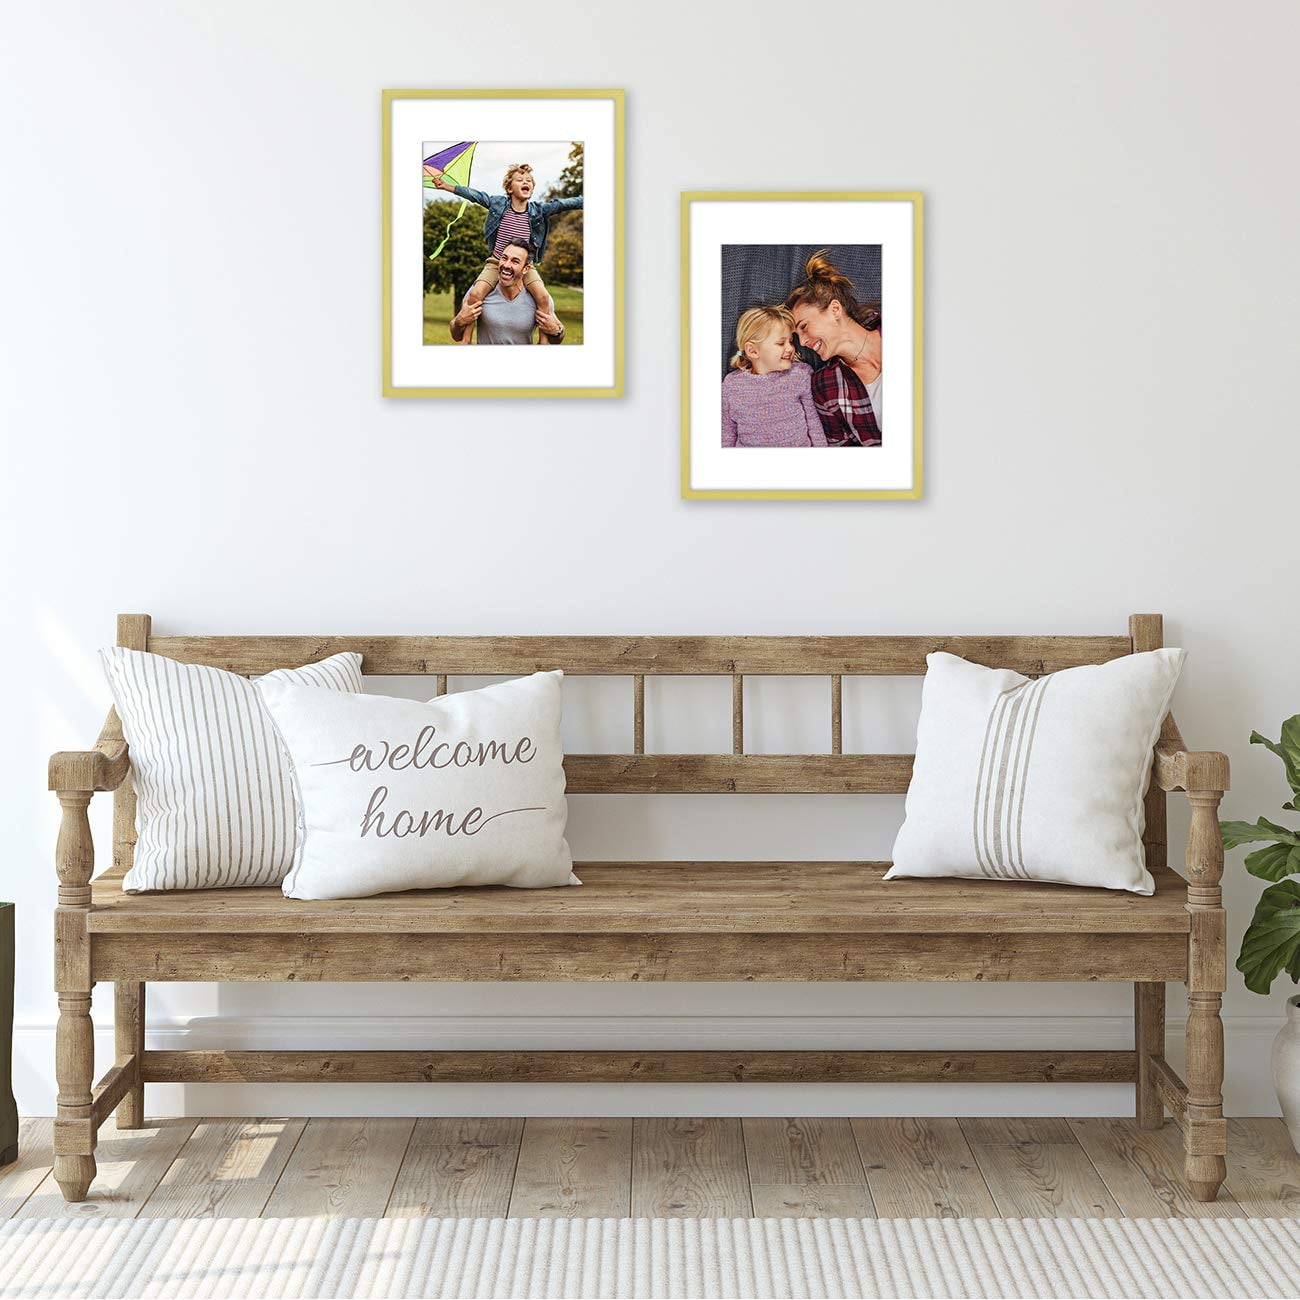  8x8 Picture Frame, Solid Oak Wood 8”x8” Picture Frames Matted  to 6”x6”,Square 8 x 8 Wood Frame with Tempered Real Glass, Rustic 8x8 Photo  Frame for Wall & Tabletop Display